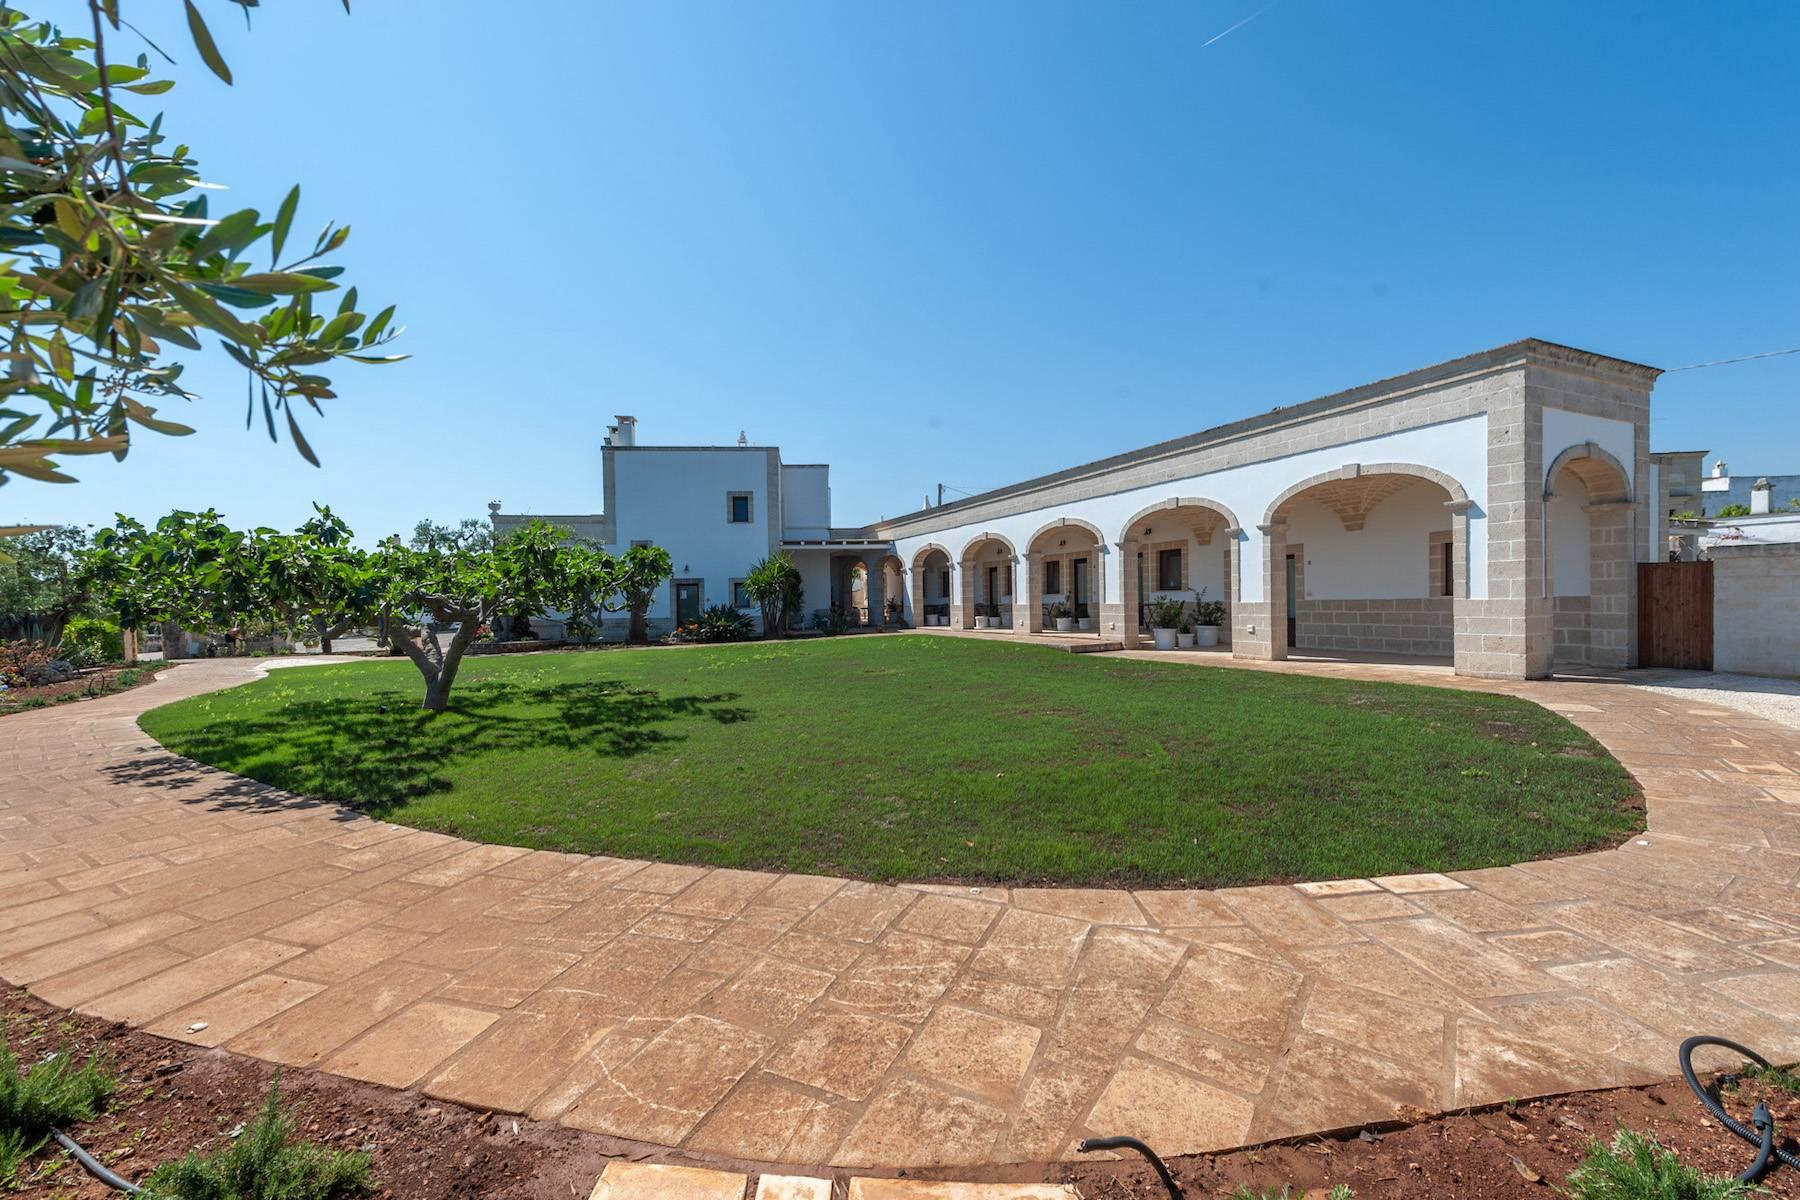 Charming 18th century Masseria surrounded by centuries-old olive trees - 29